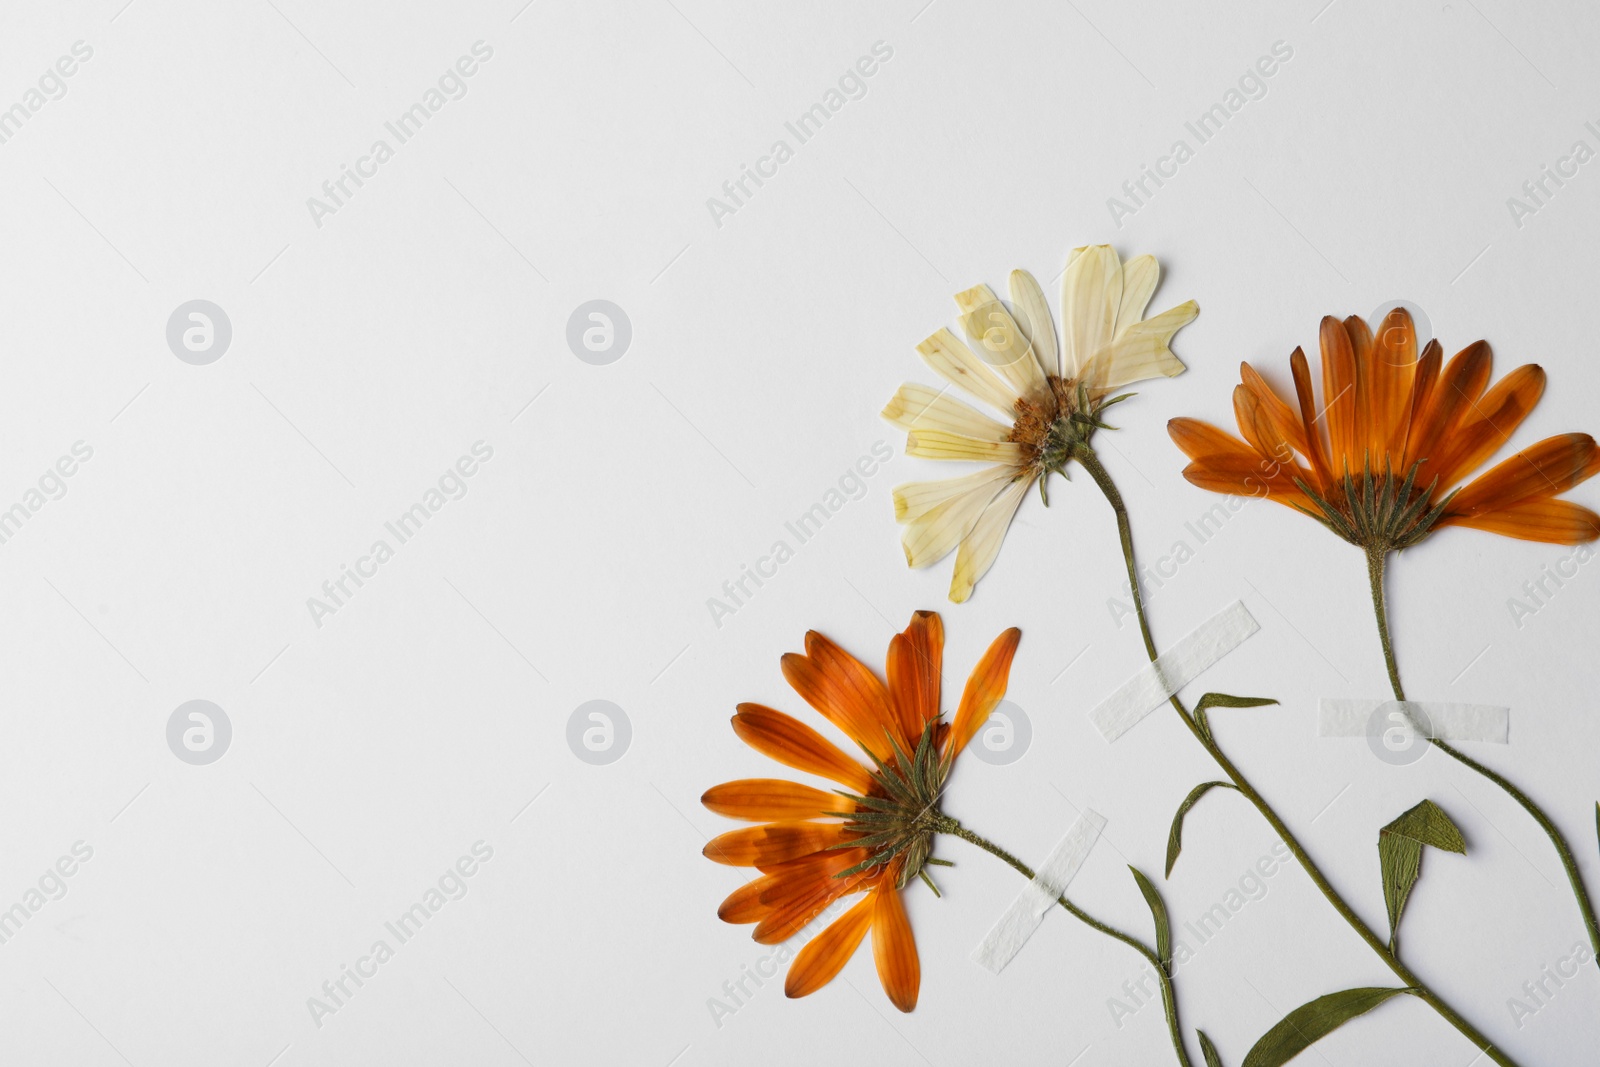 Photo of Wild pressed dried chrysanthemum flowers on white background, space for text. Beautiful herbarium